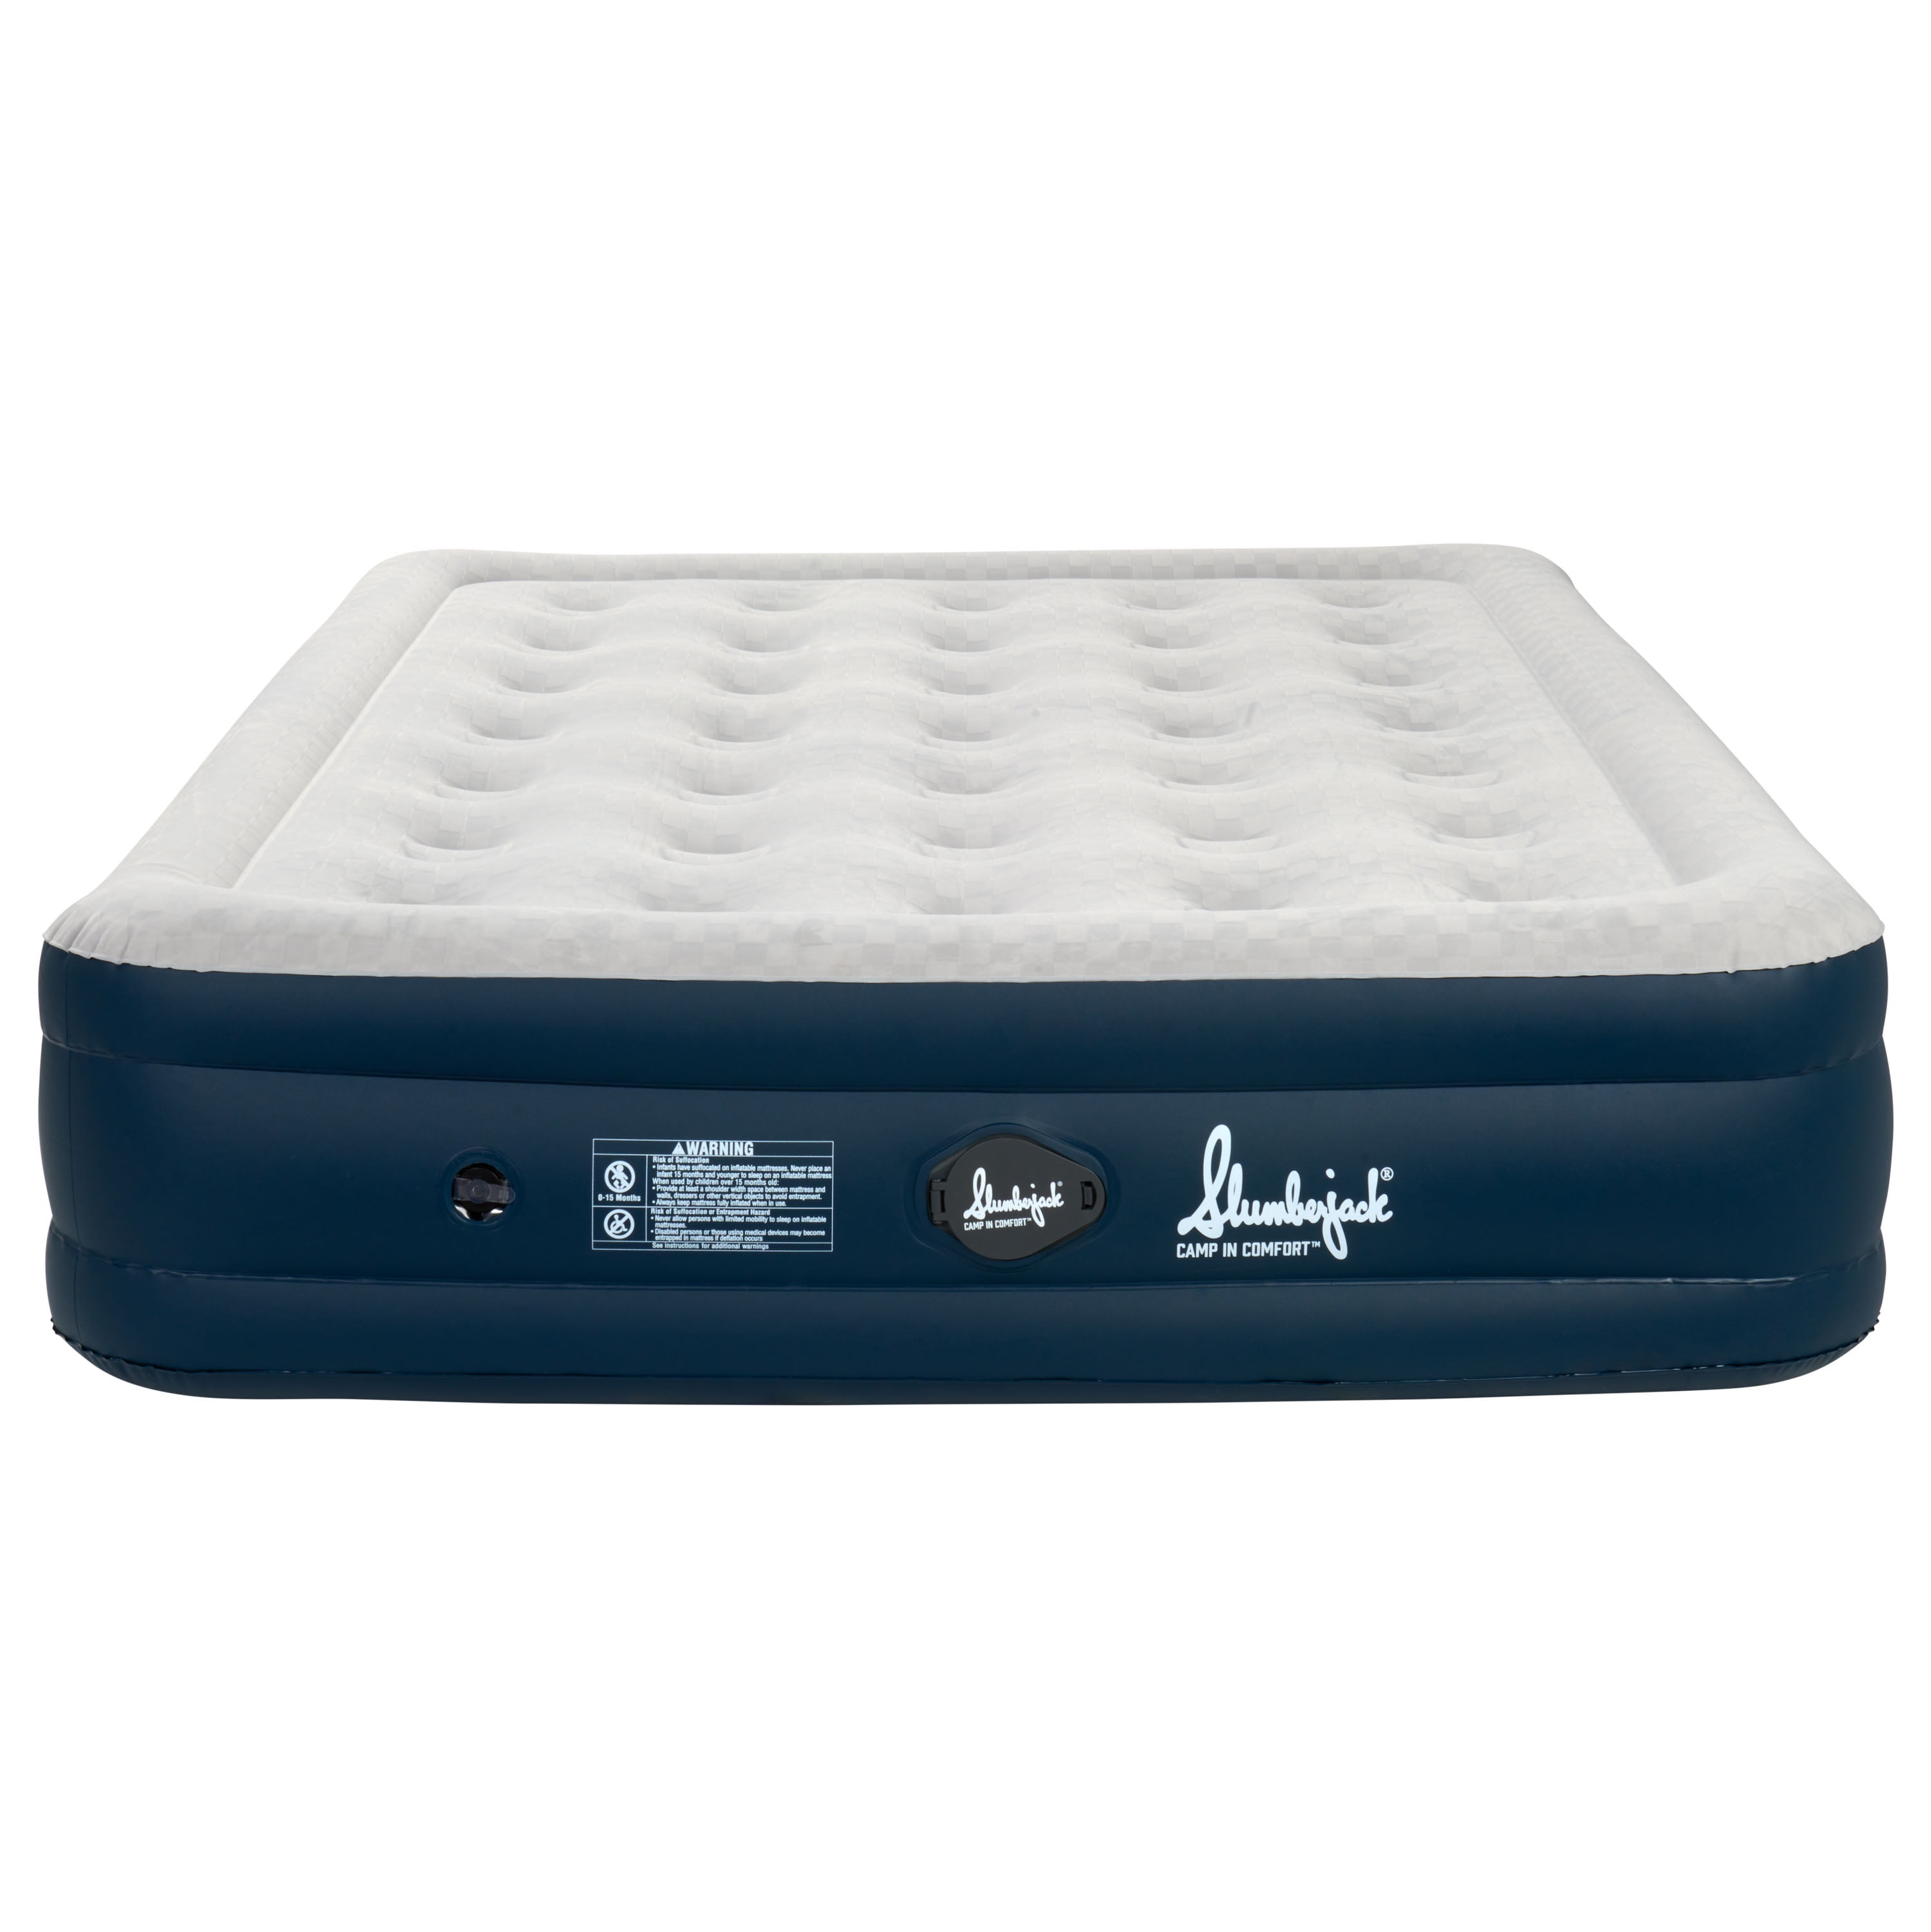 Slumberjack Grand Mesa 15" Airbed Mattress, with Built-in Removable Pump, Queen